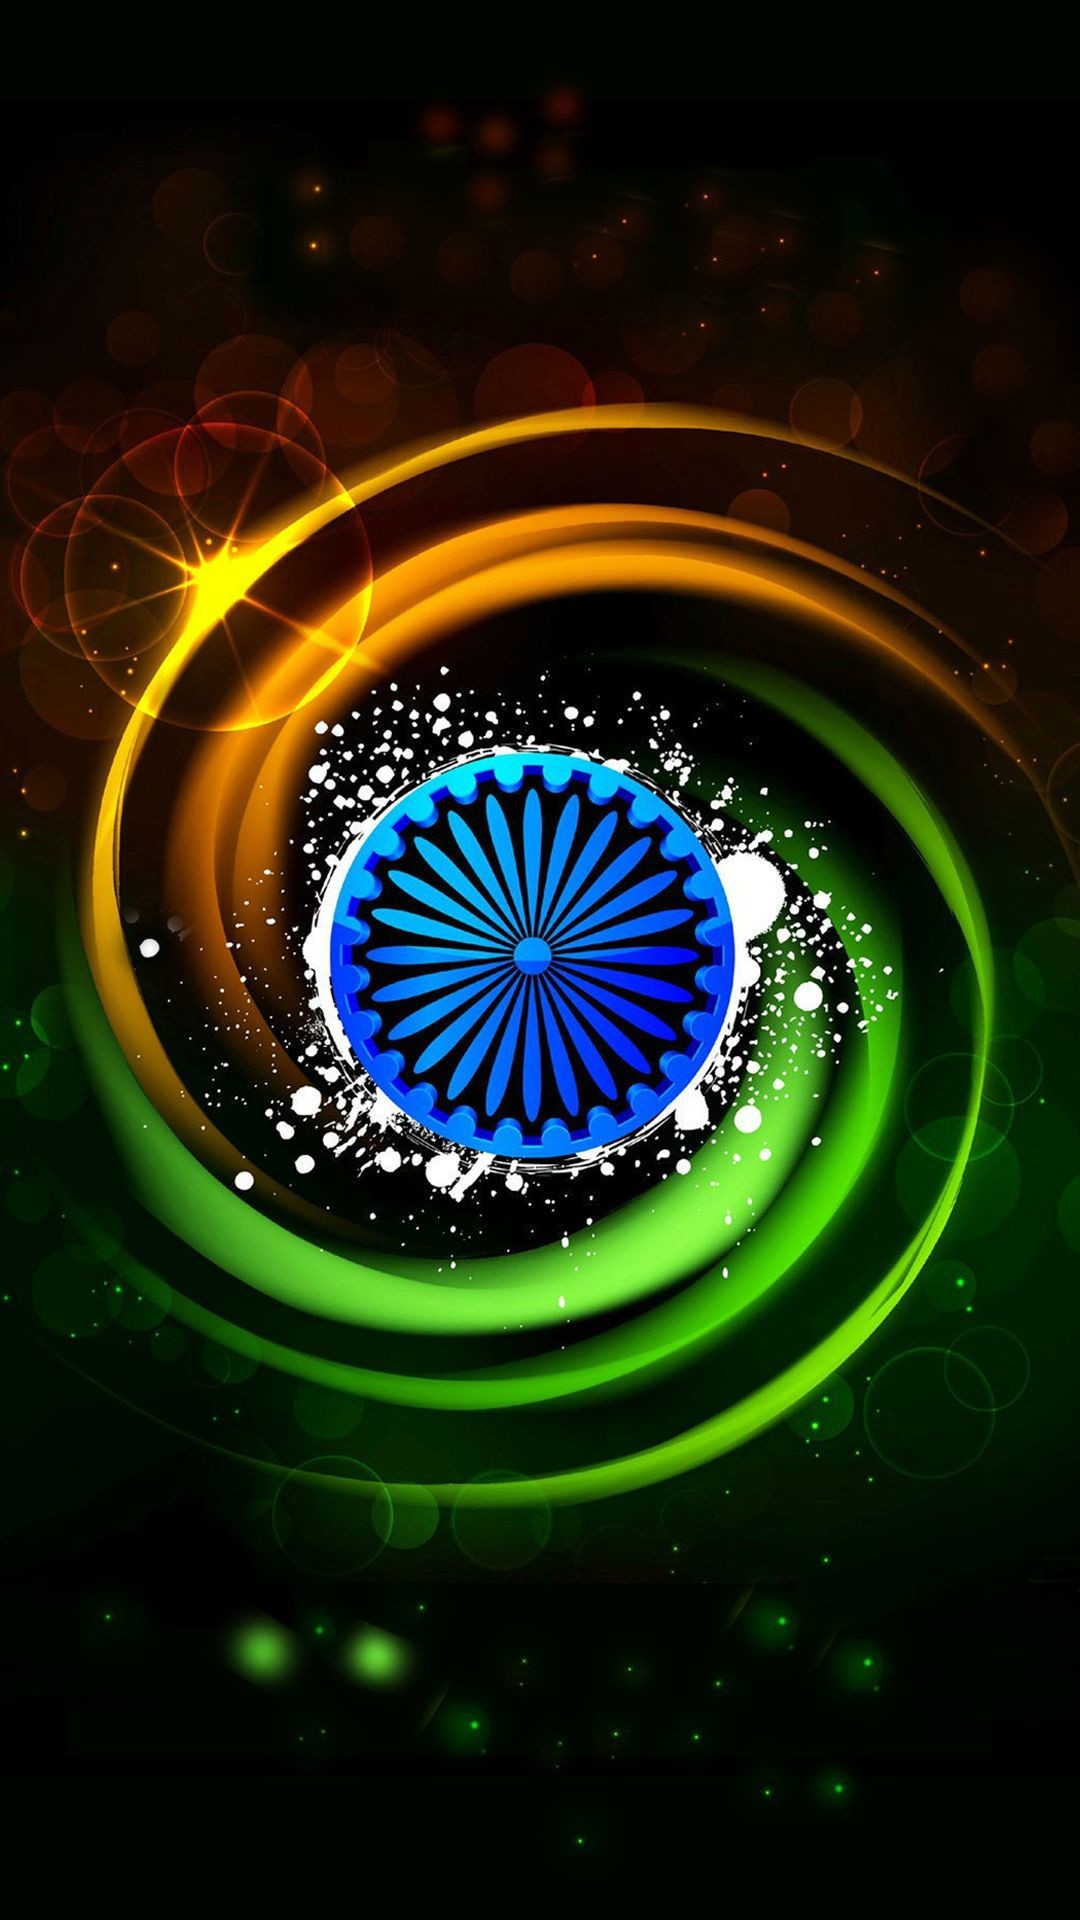 1080x1920 Indian Independence Day Images in 3D Design. But I redesigned it to create  a wallpaper